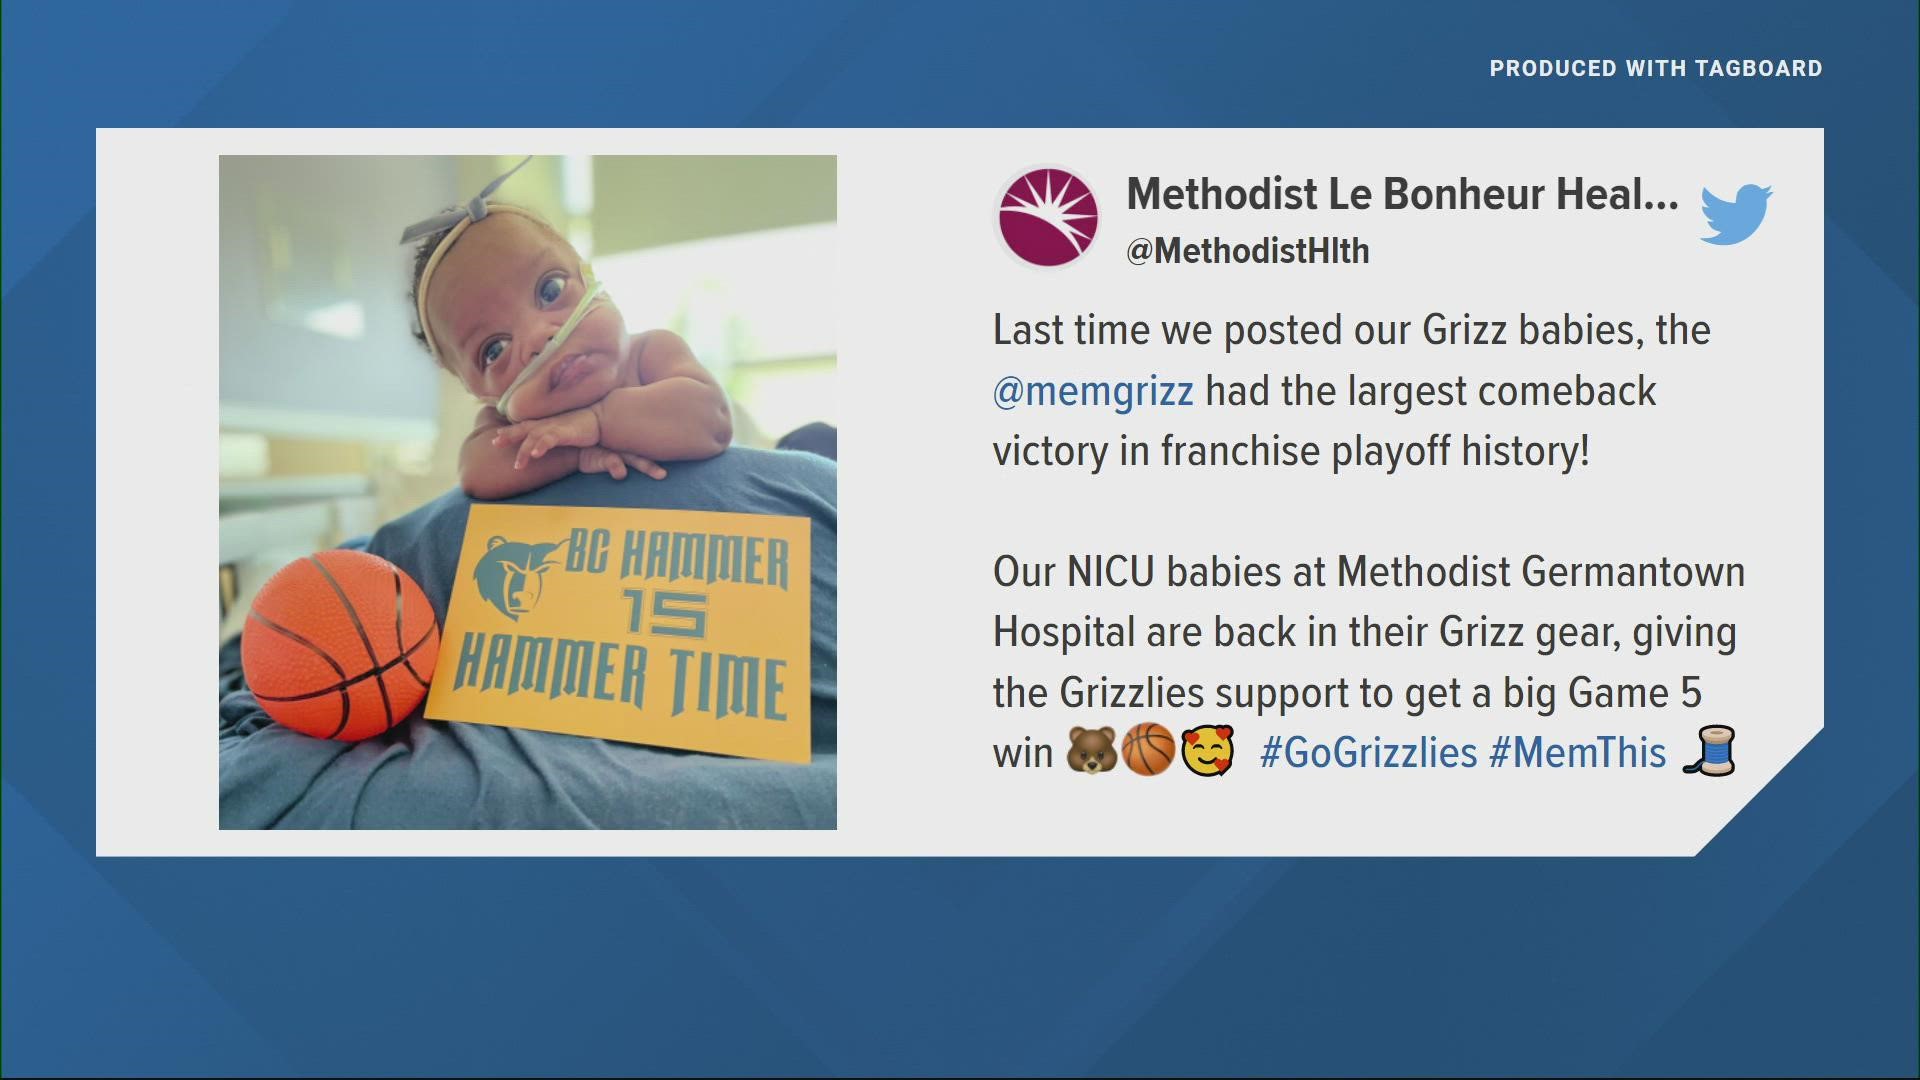 The last time the hospital posted their Grizz babies, the team had the largest comeback win in franchise playoff history.